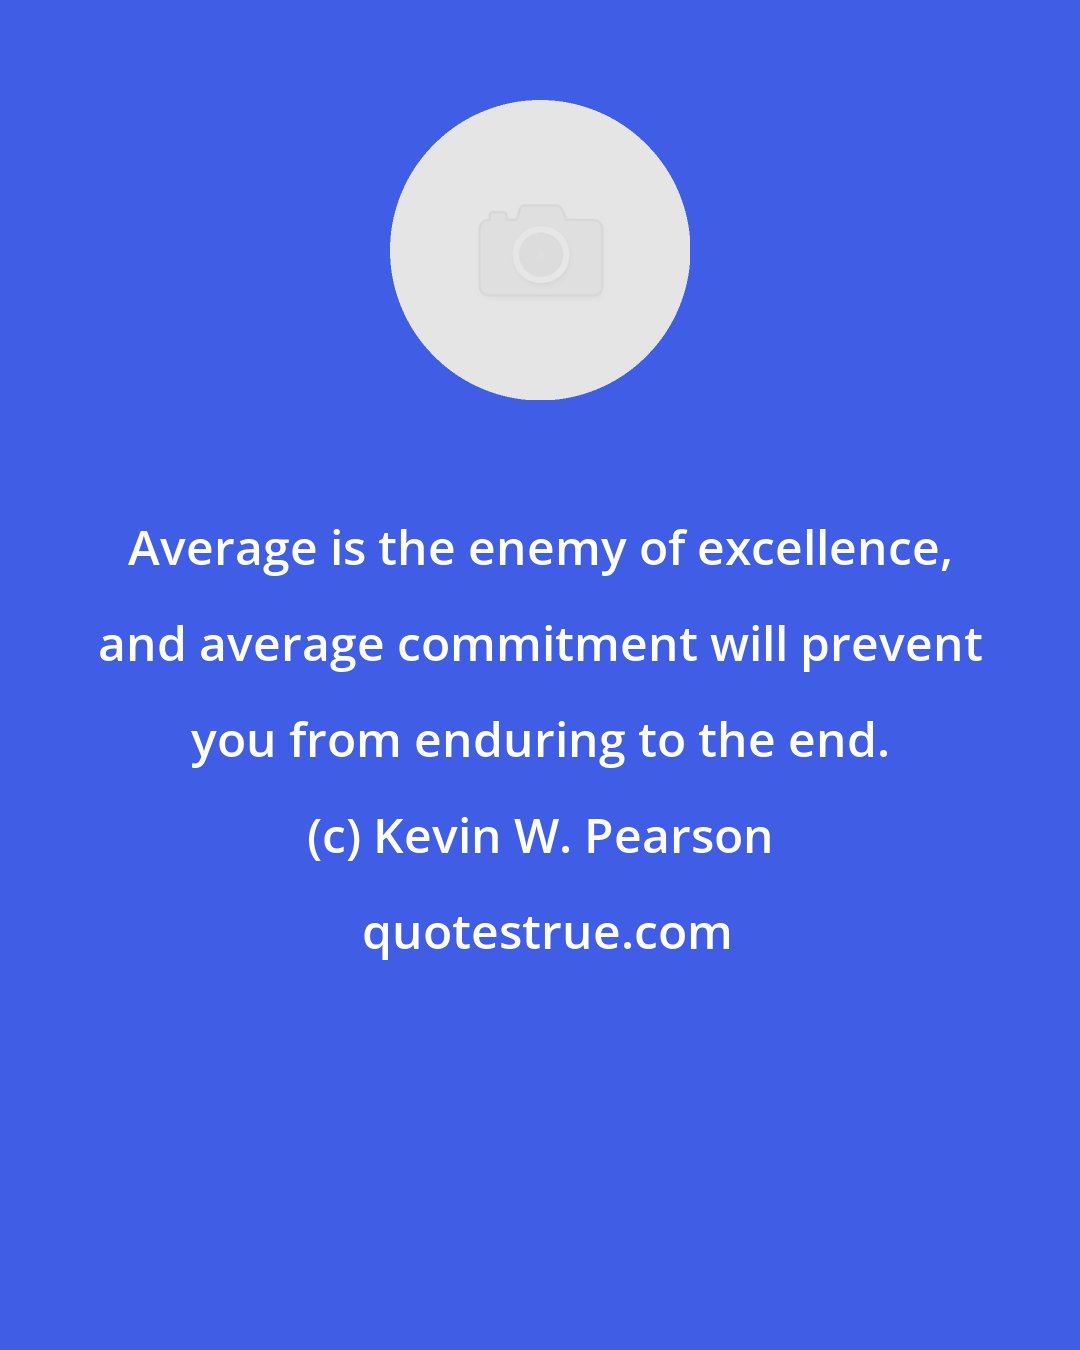 Kevin W. Pearson: Average is the enemy of excellence, and average commitment will prevent you from enduring to the end.